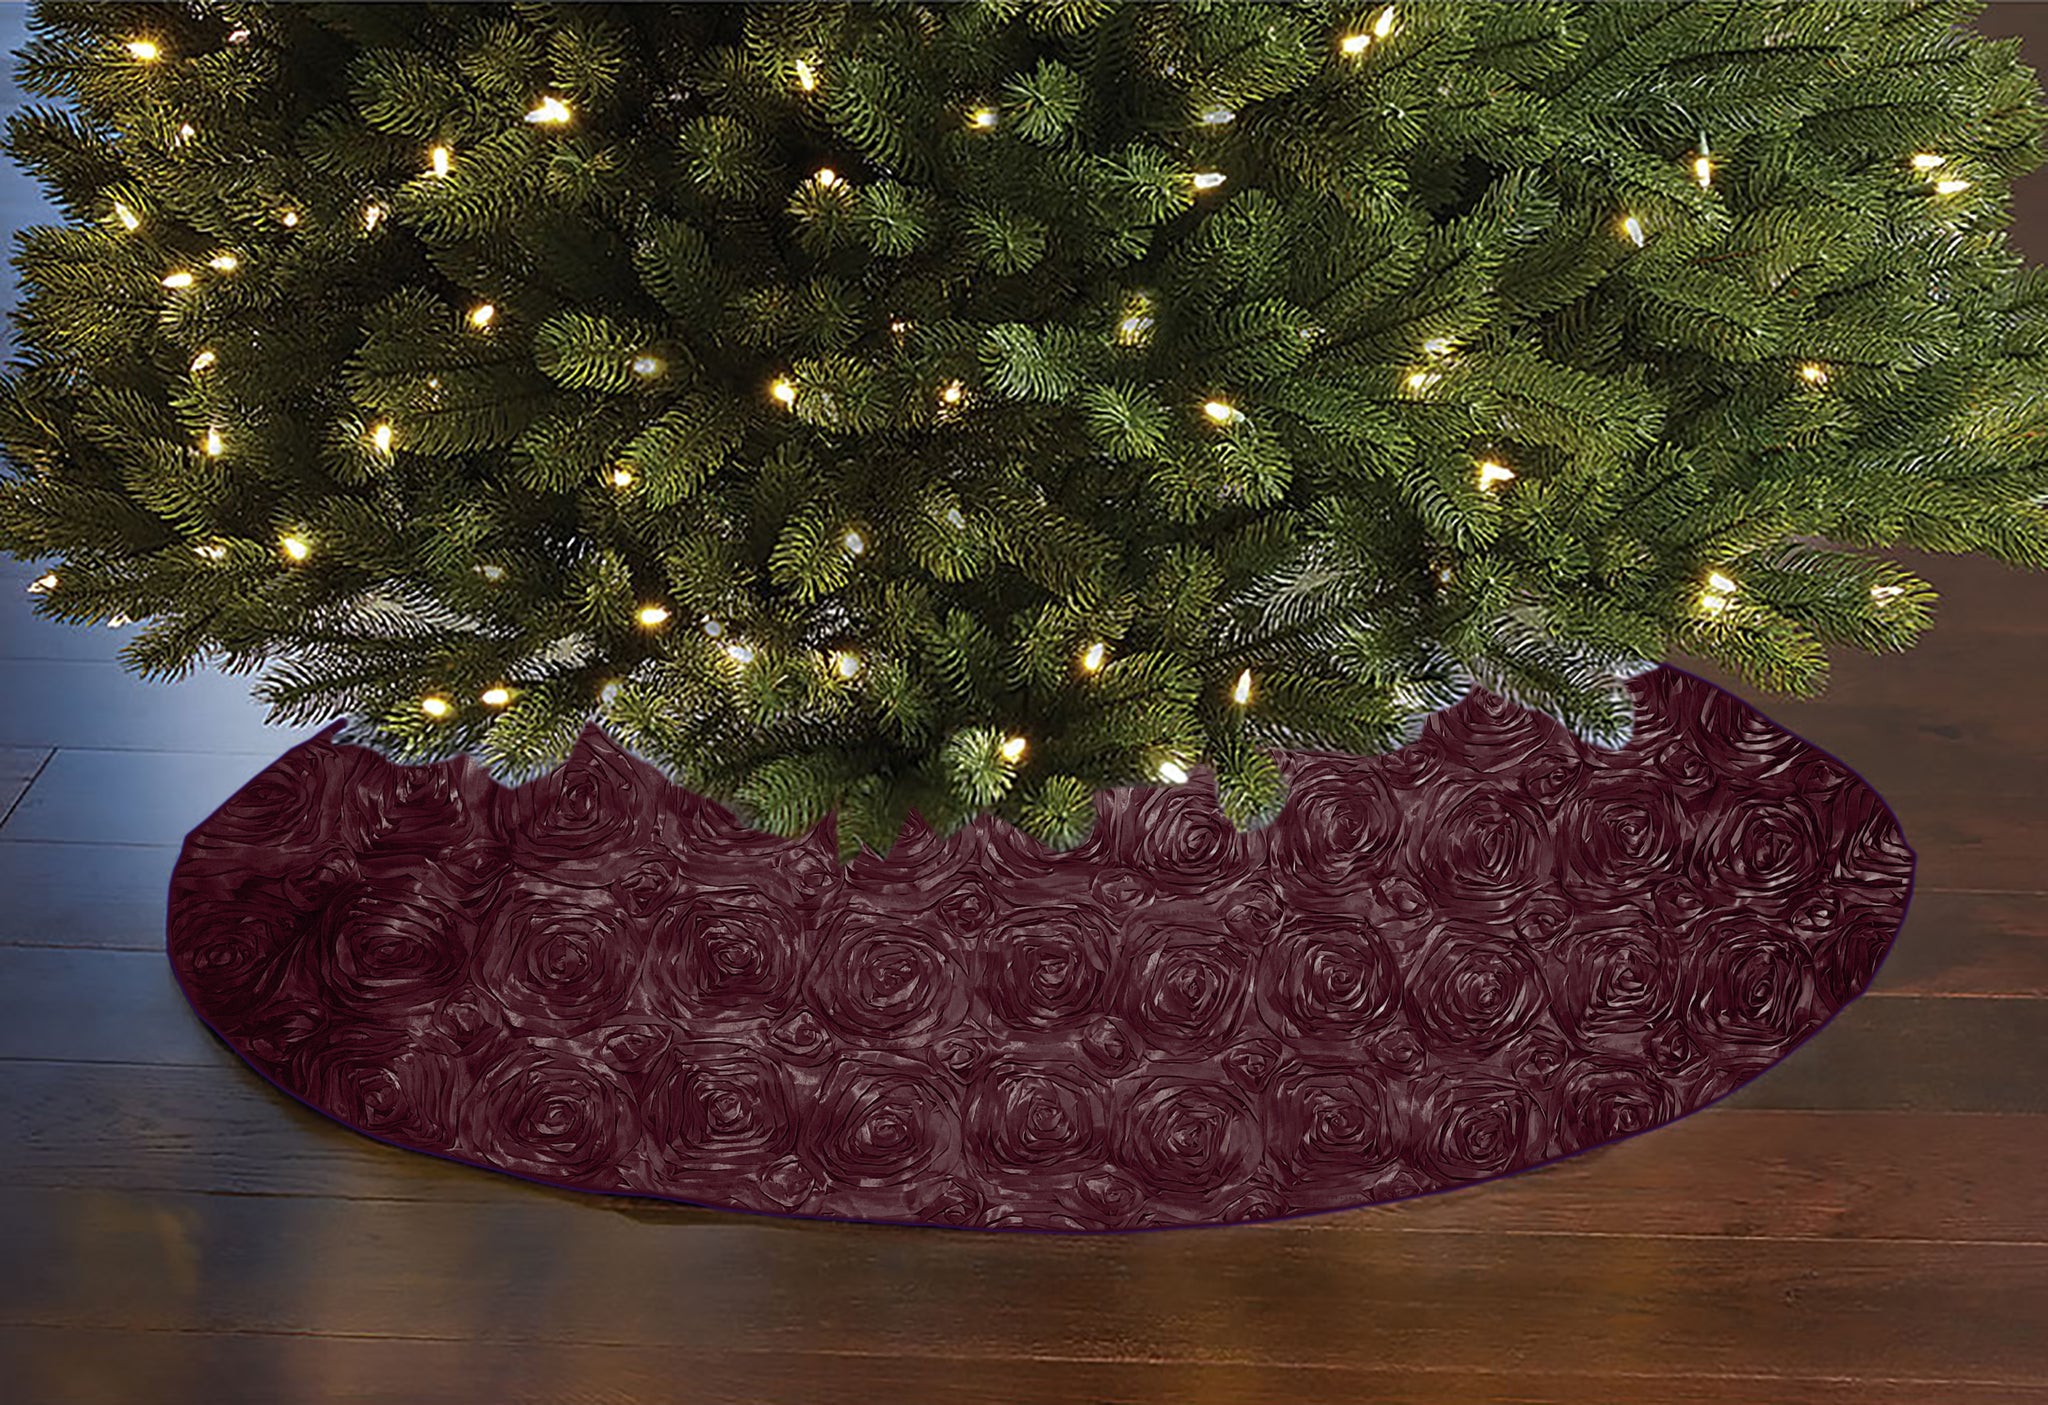 LOCHAS 60-Inch Wavy Edged Reversible Knit Christmas Tree Skirt: Burgundy &  White Snowflake Pattern with Lace Ties | SHEIN USA